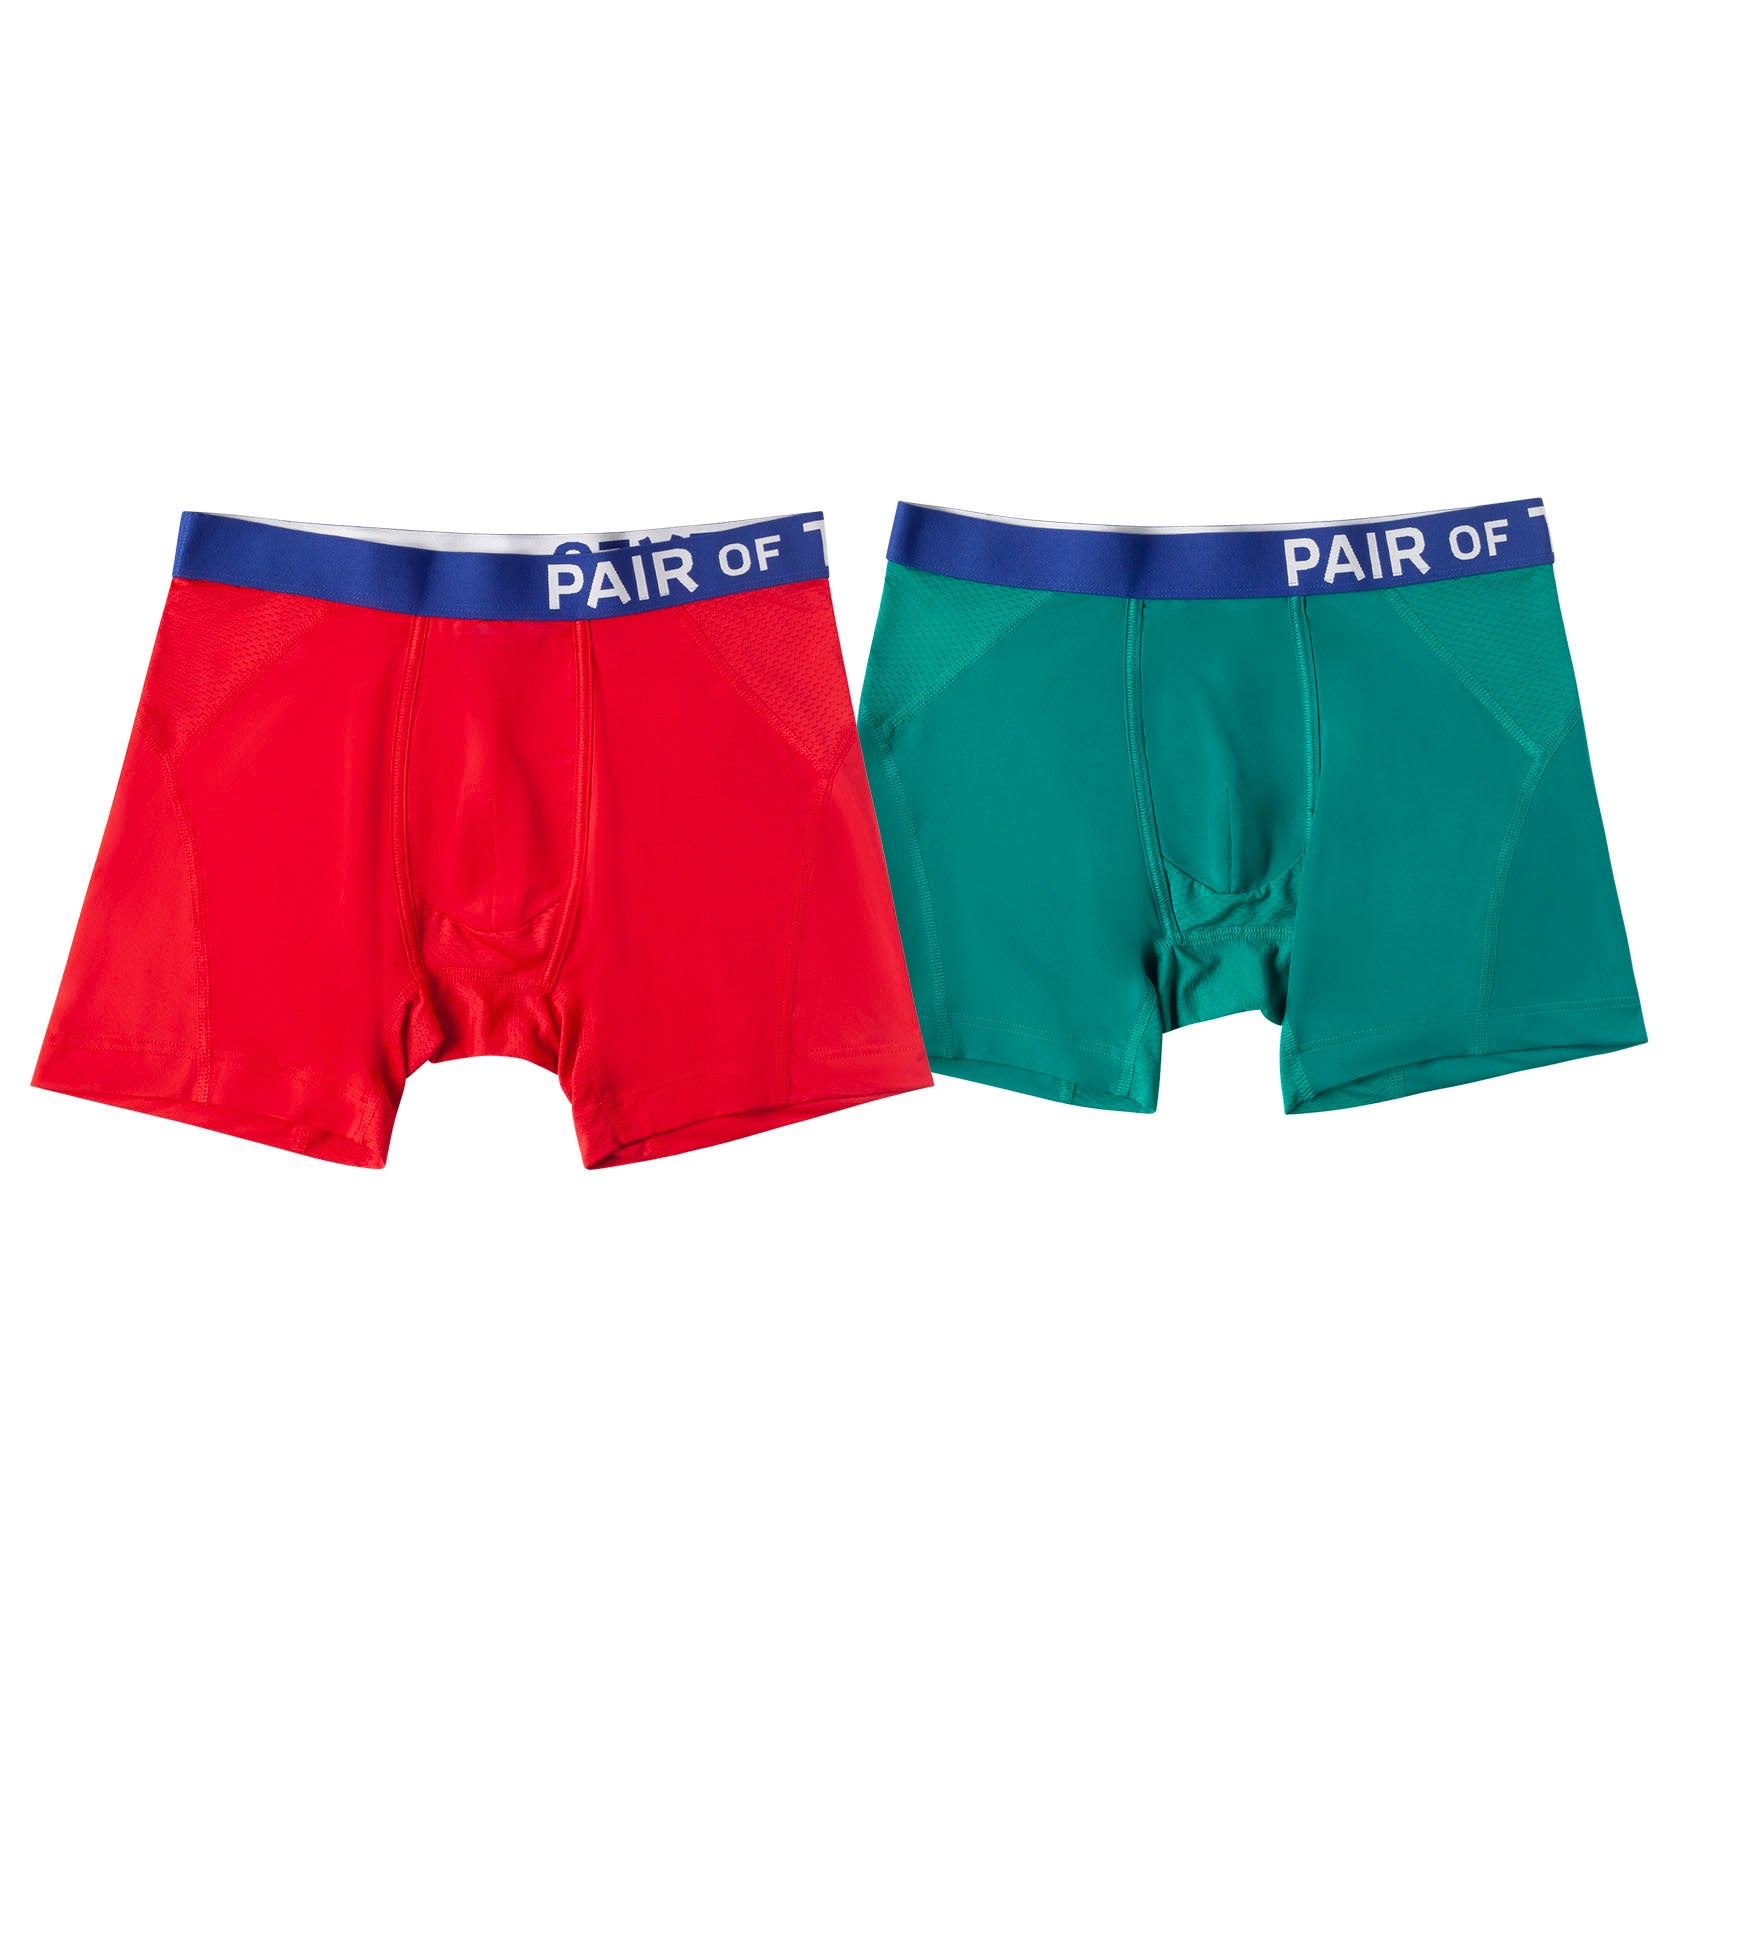 Pair Of Thieves Men's Supercool Boxer Briefs 2pk - Green/red Xl